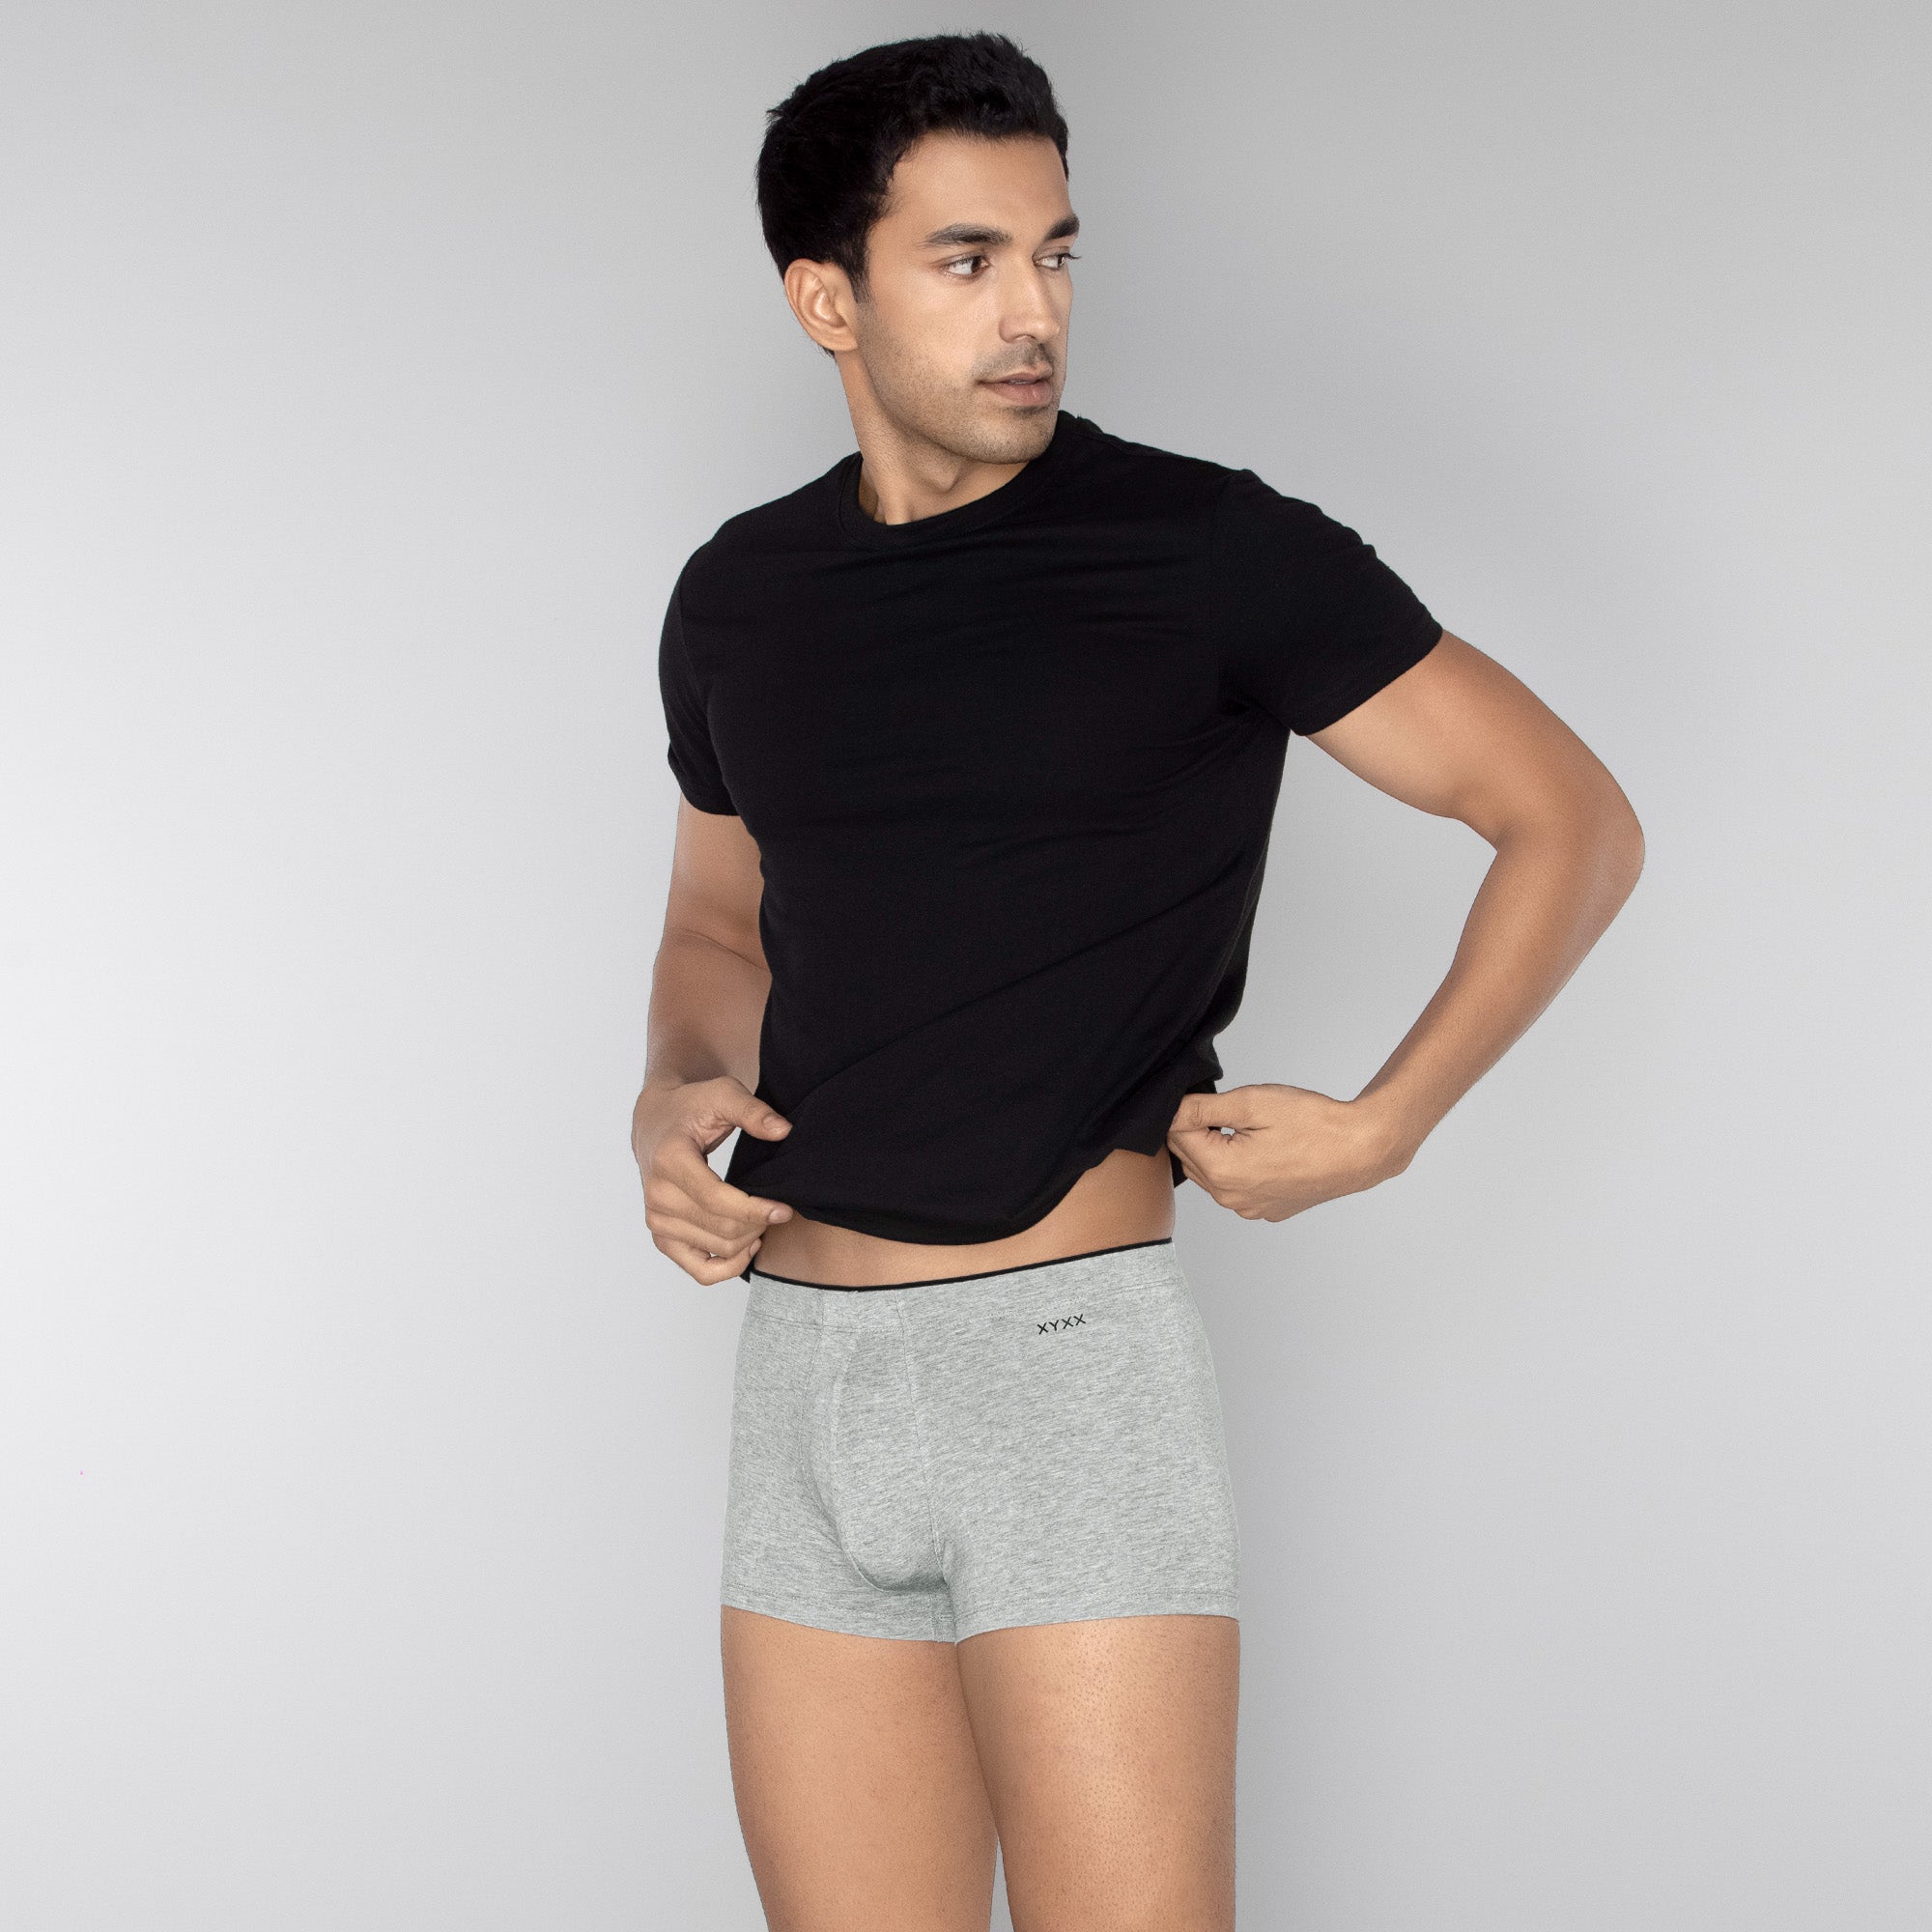 Uno Medley Modal Trunks For Men Icy Grey -  XYXX Mens Apparels